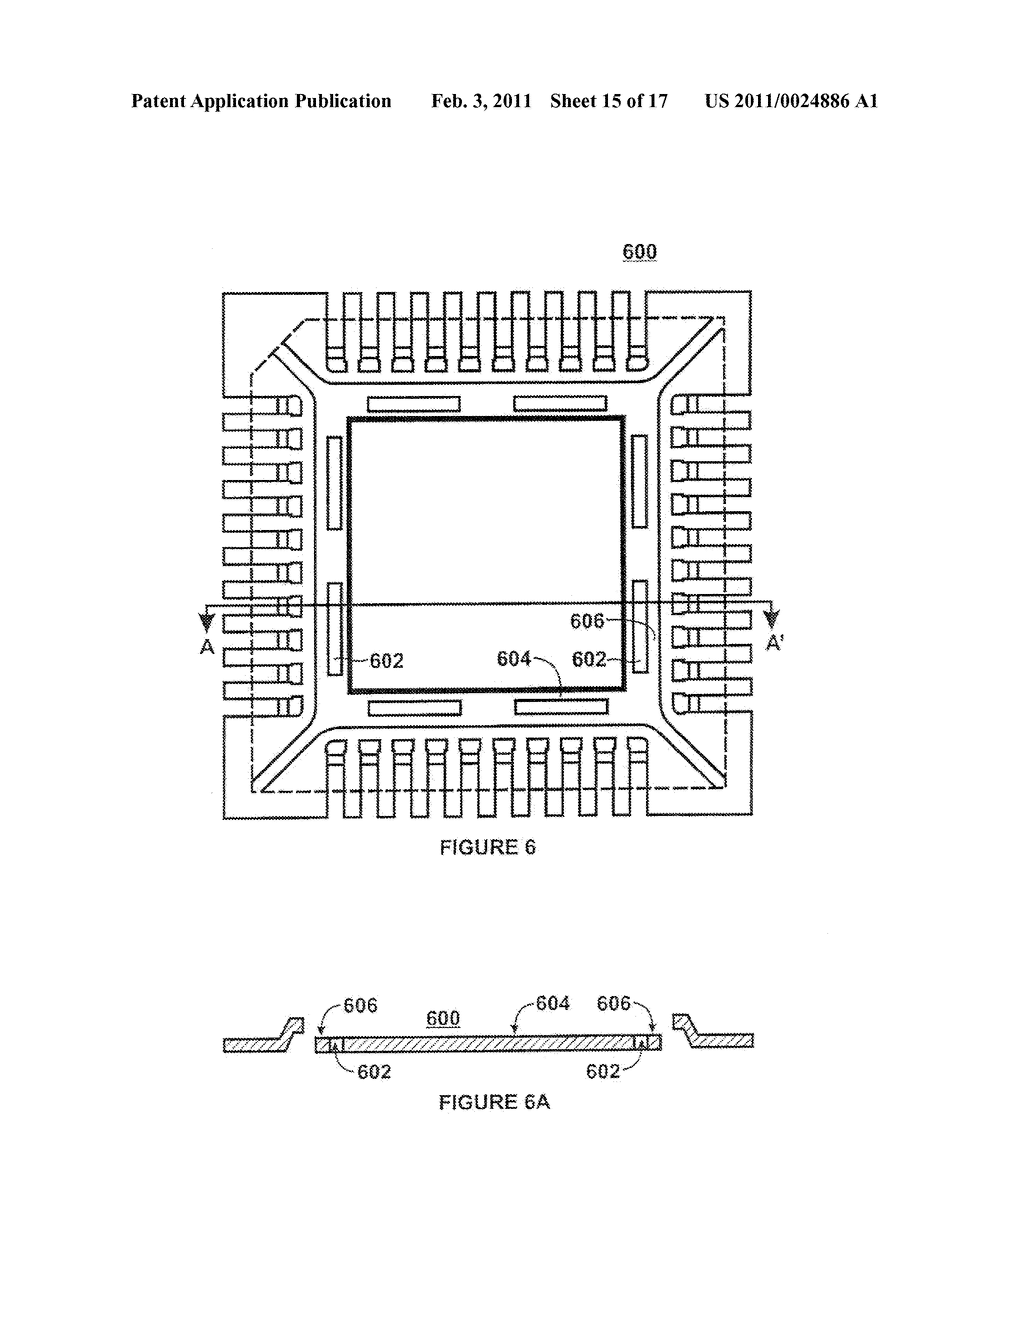 SEMICONDUCTOR DEVICE PACKAGE HAVING FEATURES FORMED BY STAMPING - diagram, schematic, and image 16